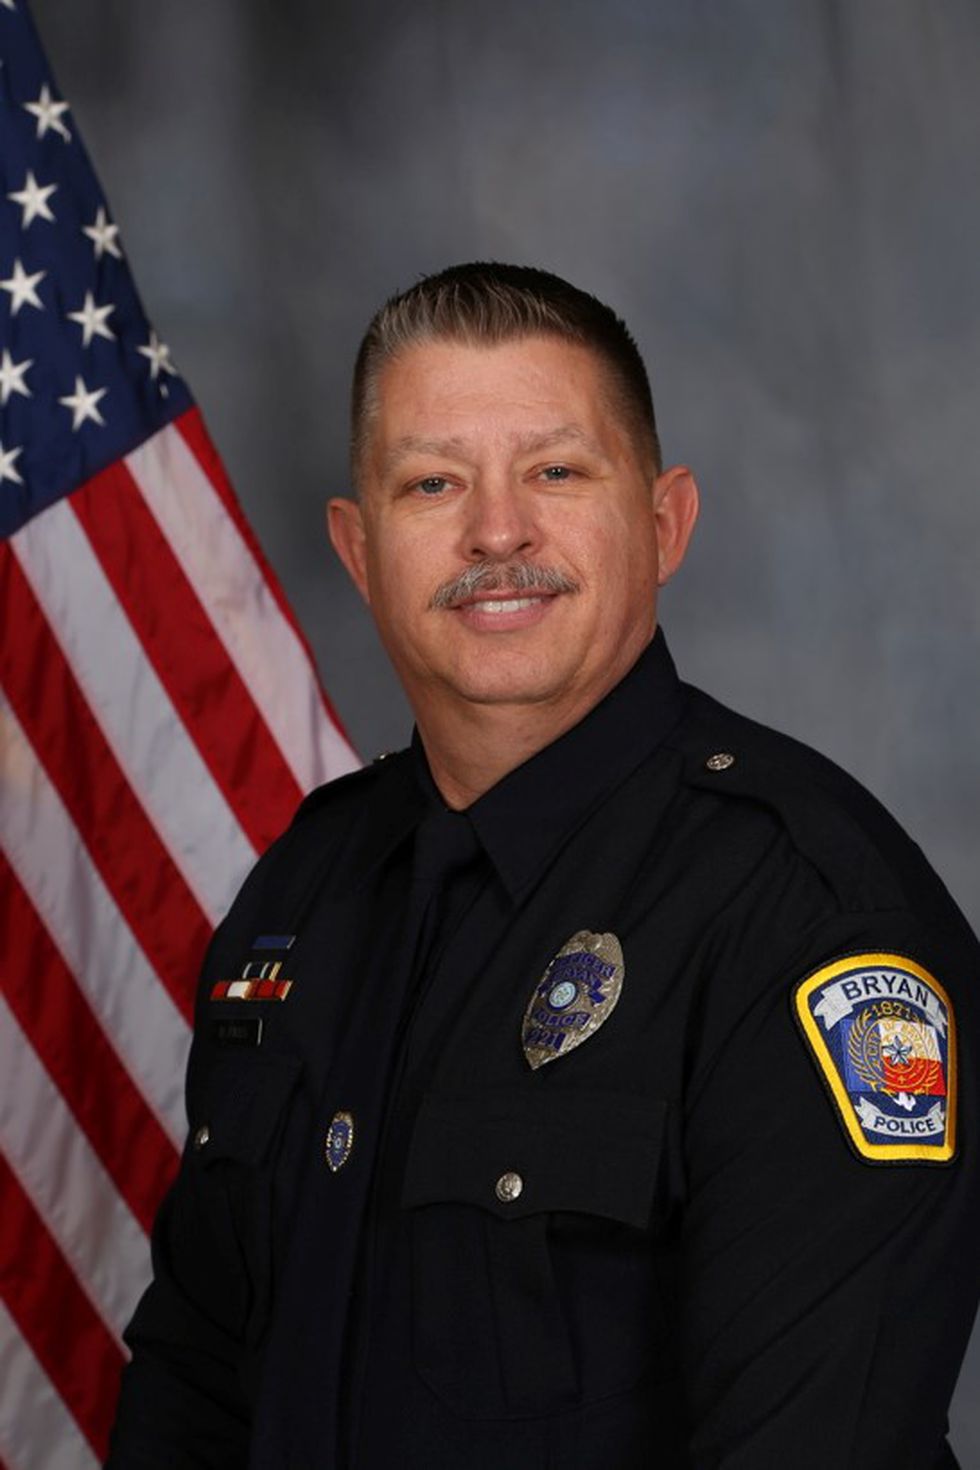 Bryan Police officer, Darrel Fikes retires after 20 years ...